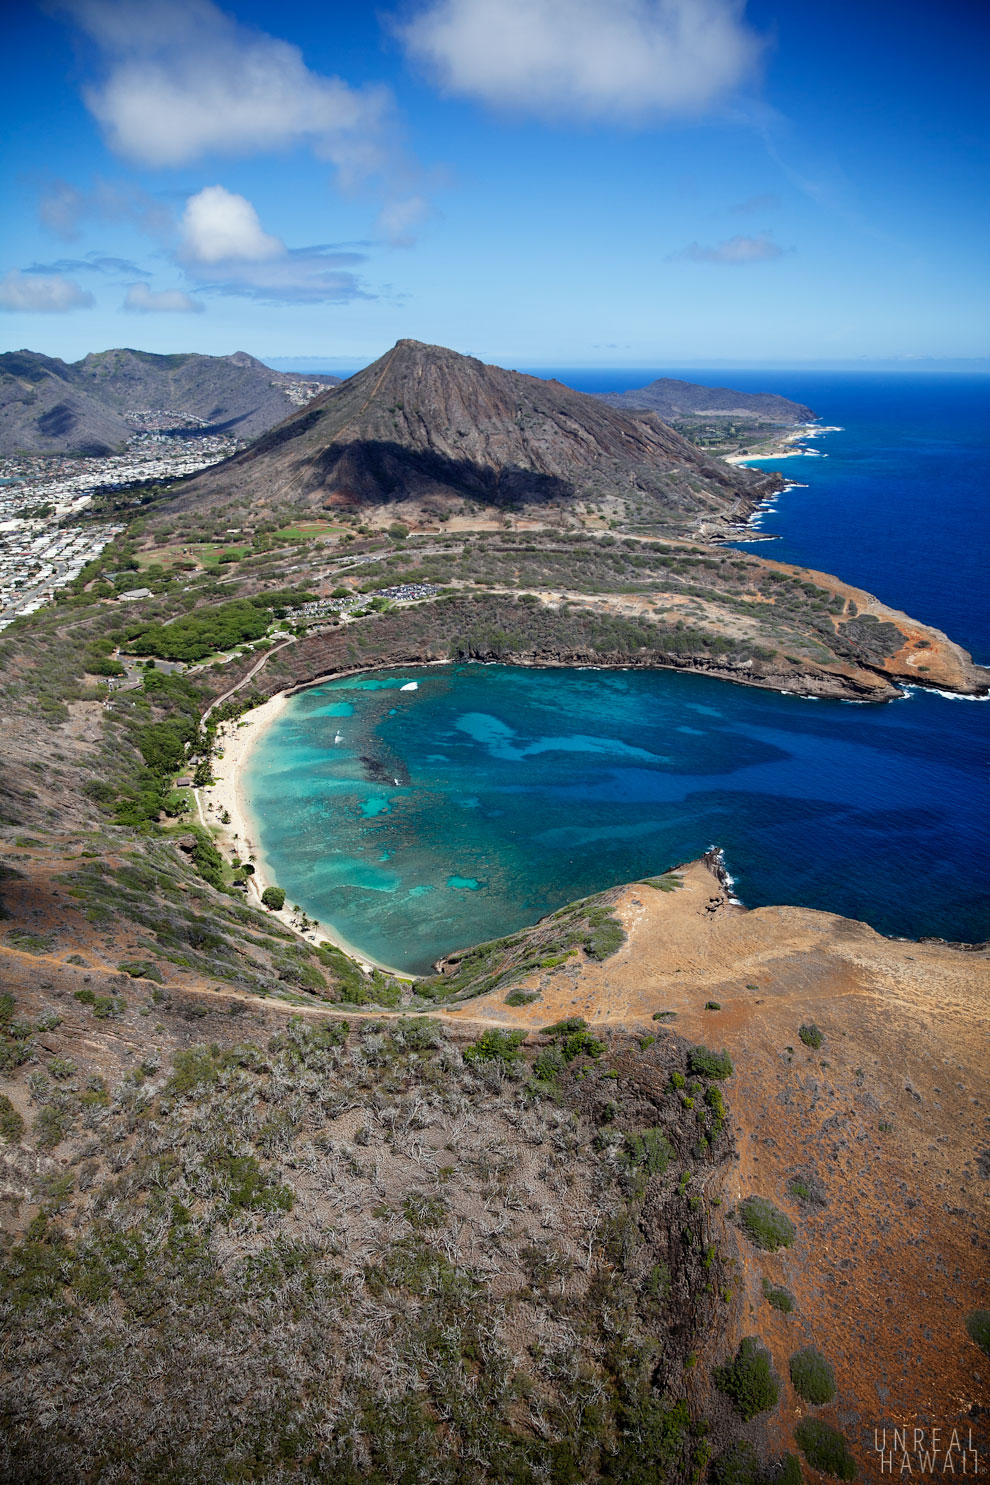 Aerial view of Hanauma Bay and Koko Head Crater from an Oahu helicopter tour, Hawaii